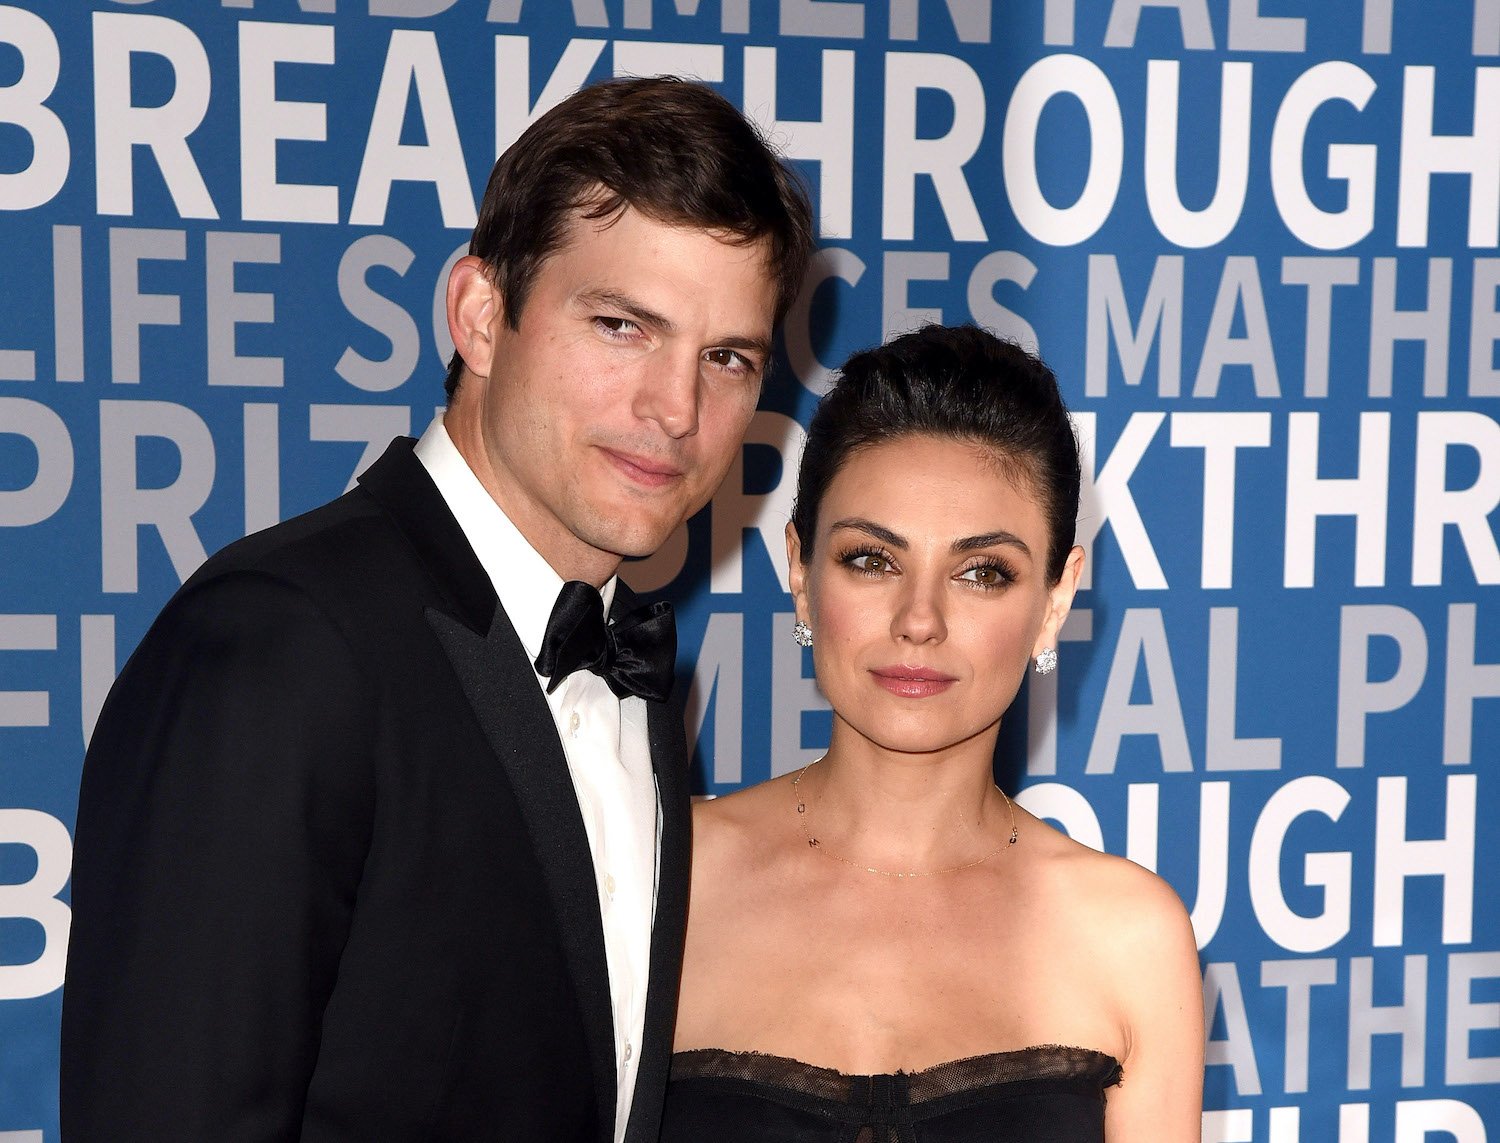 Ashton Kutcher and Mila Kunis attend the 6th Annual Breakthrough Prize at NASA Ames Research Center on December 3, 2017